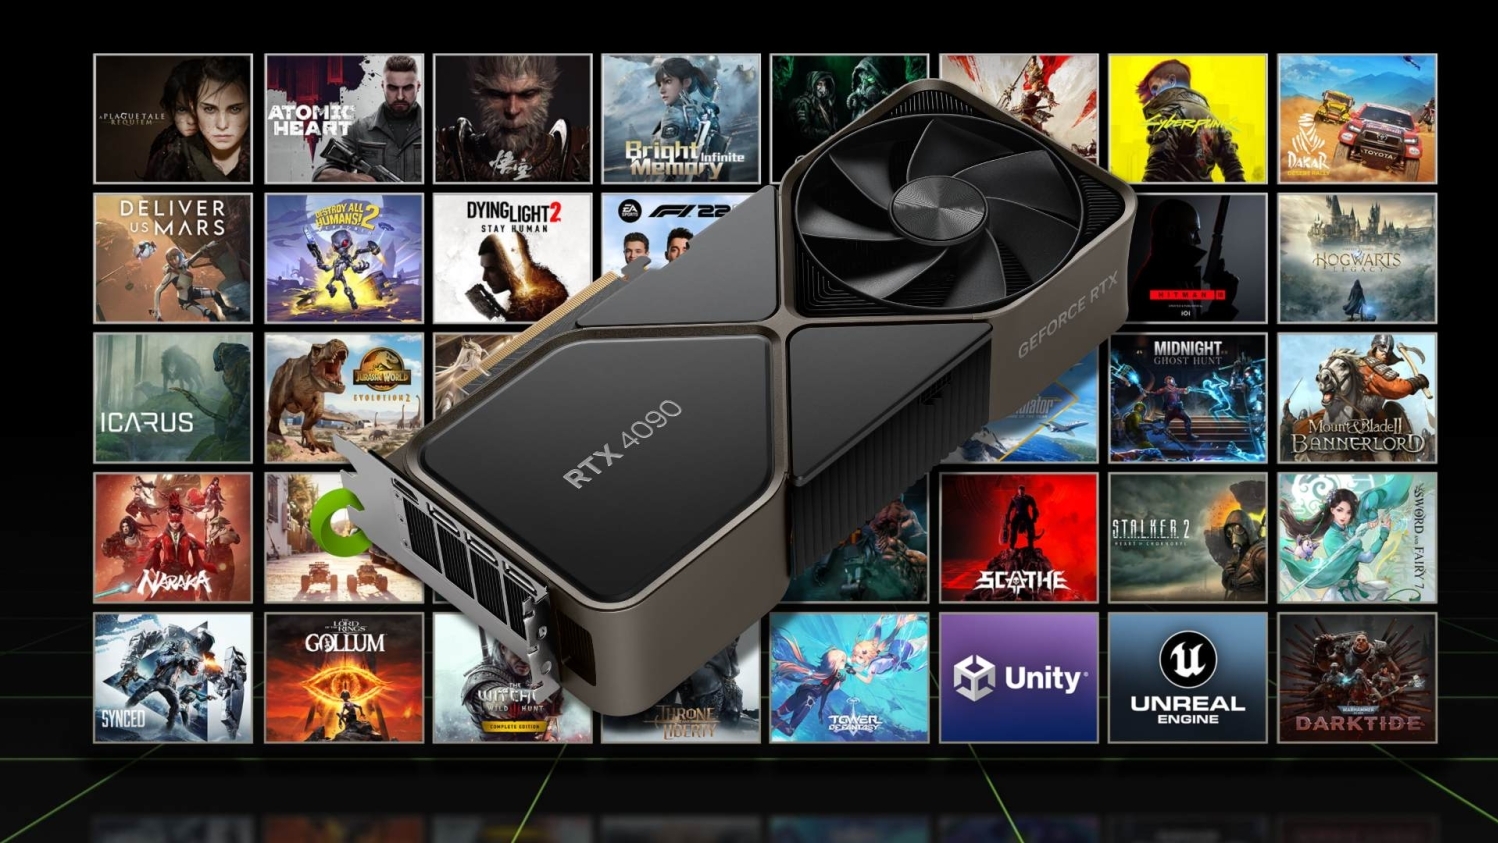 NVIDIA announces that to 400 games and apps now support GeForce tech